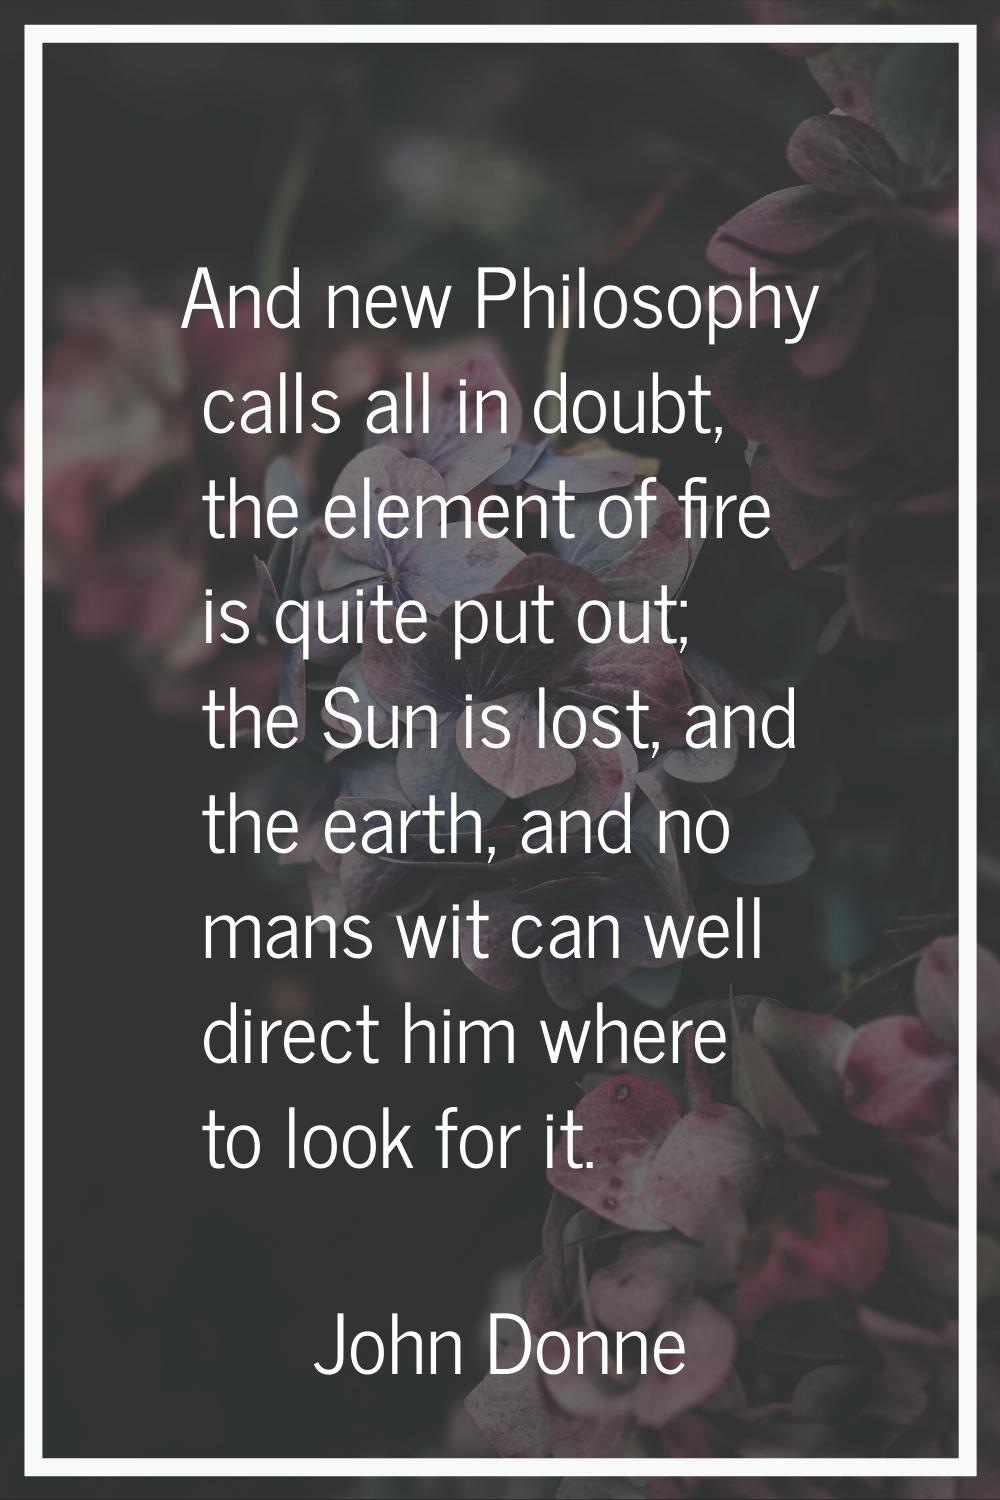 And new Philosophy calls all in doubt, the element of fire is quite put out; the Sun is lost, and t